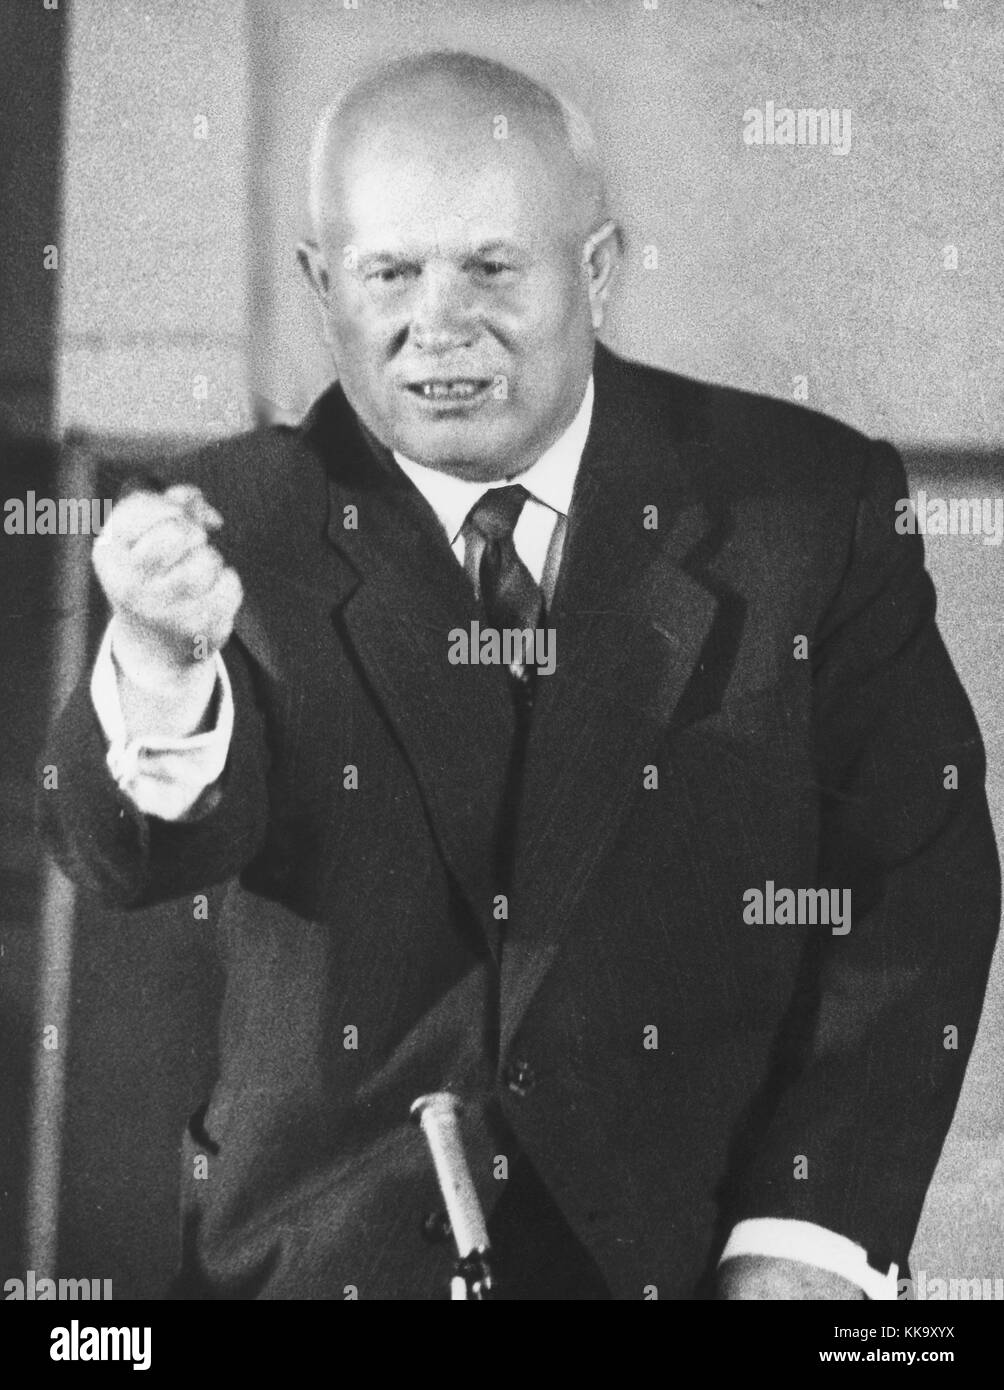 Soviet prime minister Nikita Chruschtschow at press conference in Paris on 18 May 1960.  | usage worldwide Stock Photo